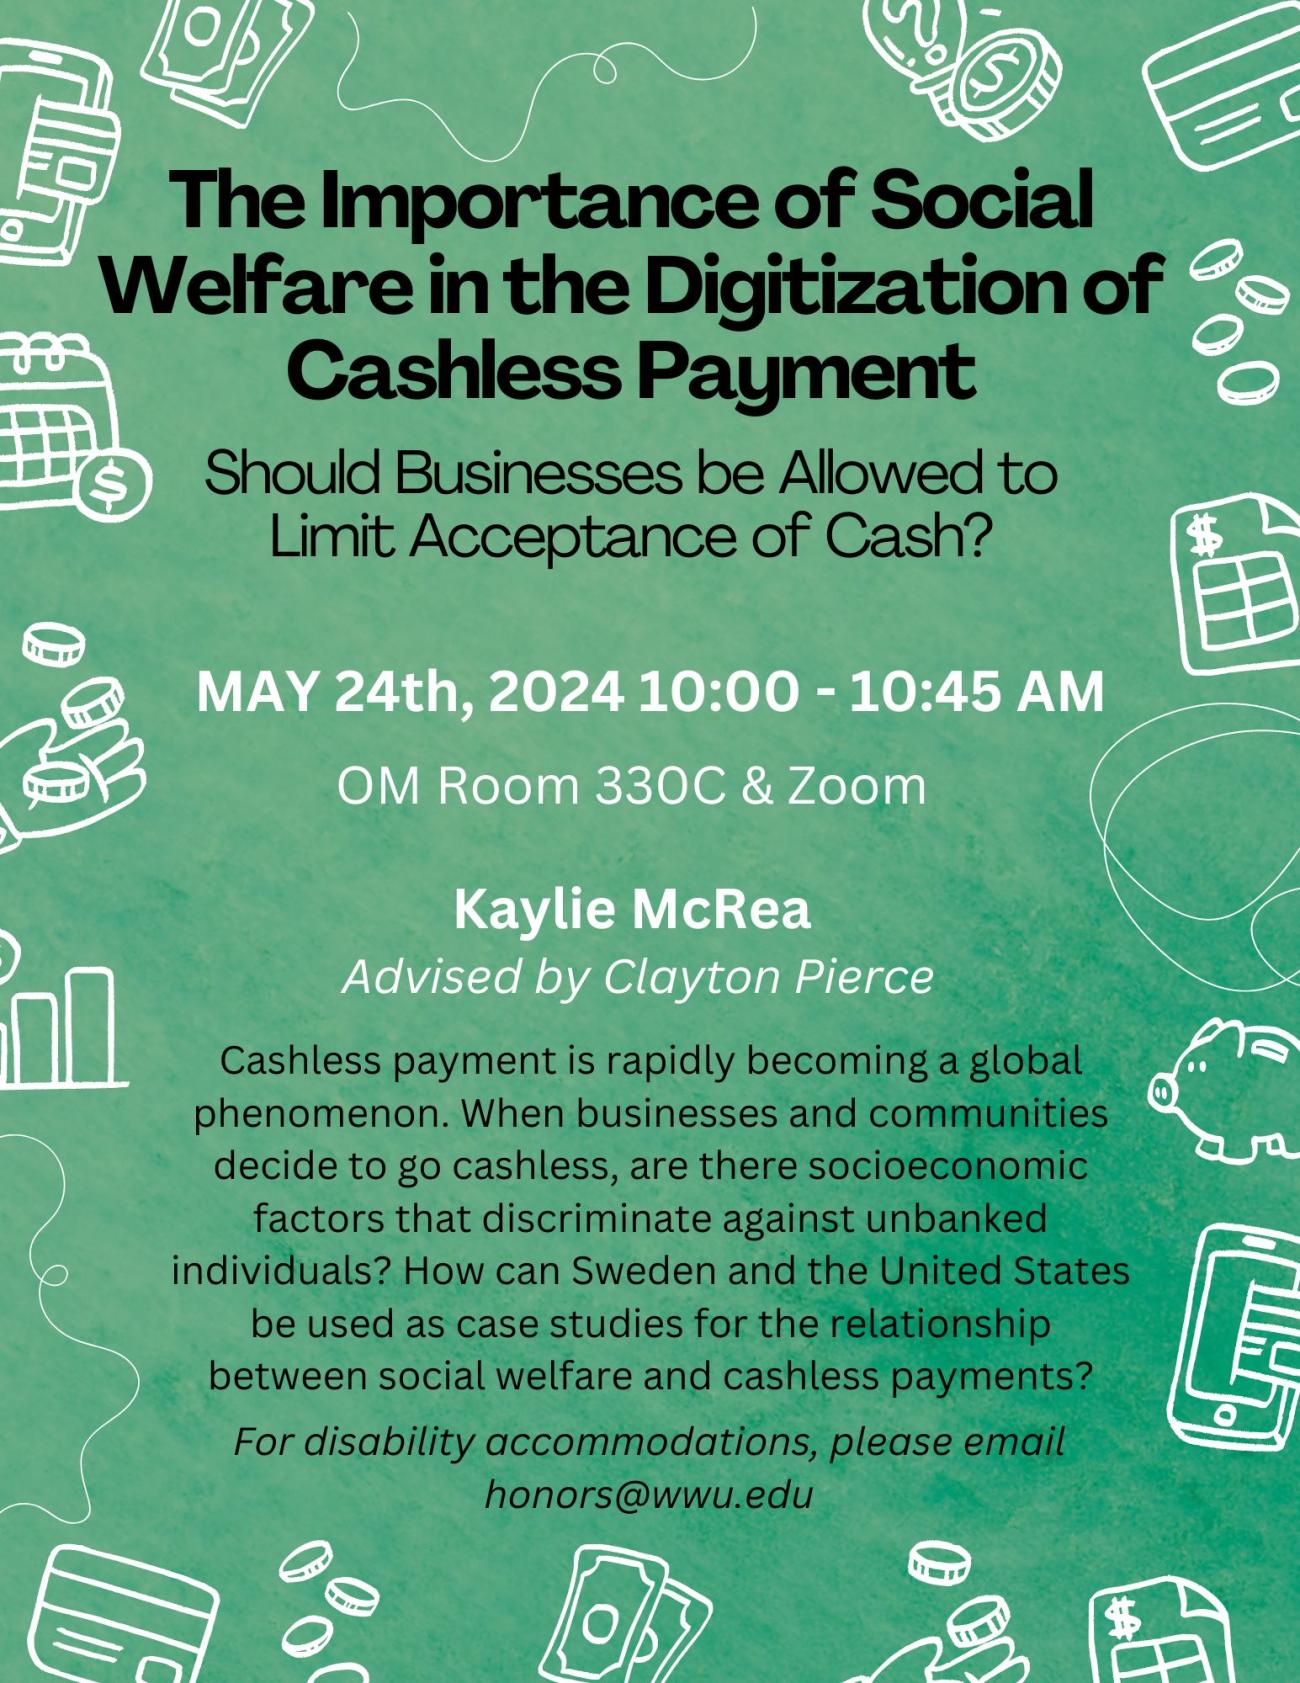 Green background with various white icons of credit cards, coins, cash, and budget sheets. Black and White text layered on Green background, centered on the page. "The Importance of Social Welfare in the Digitization of Cashless Payment"